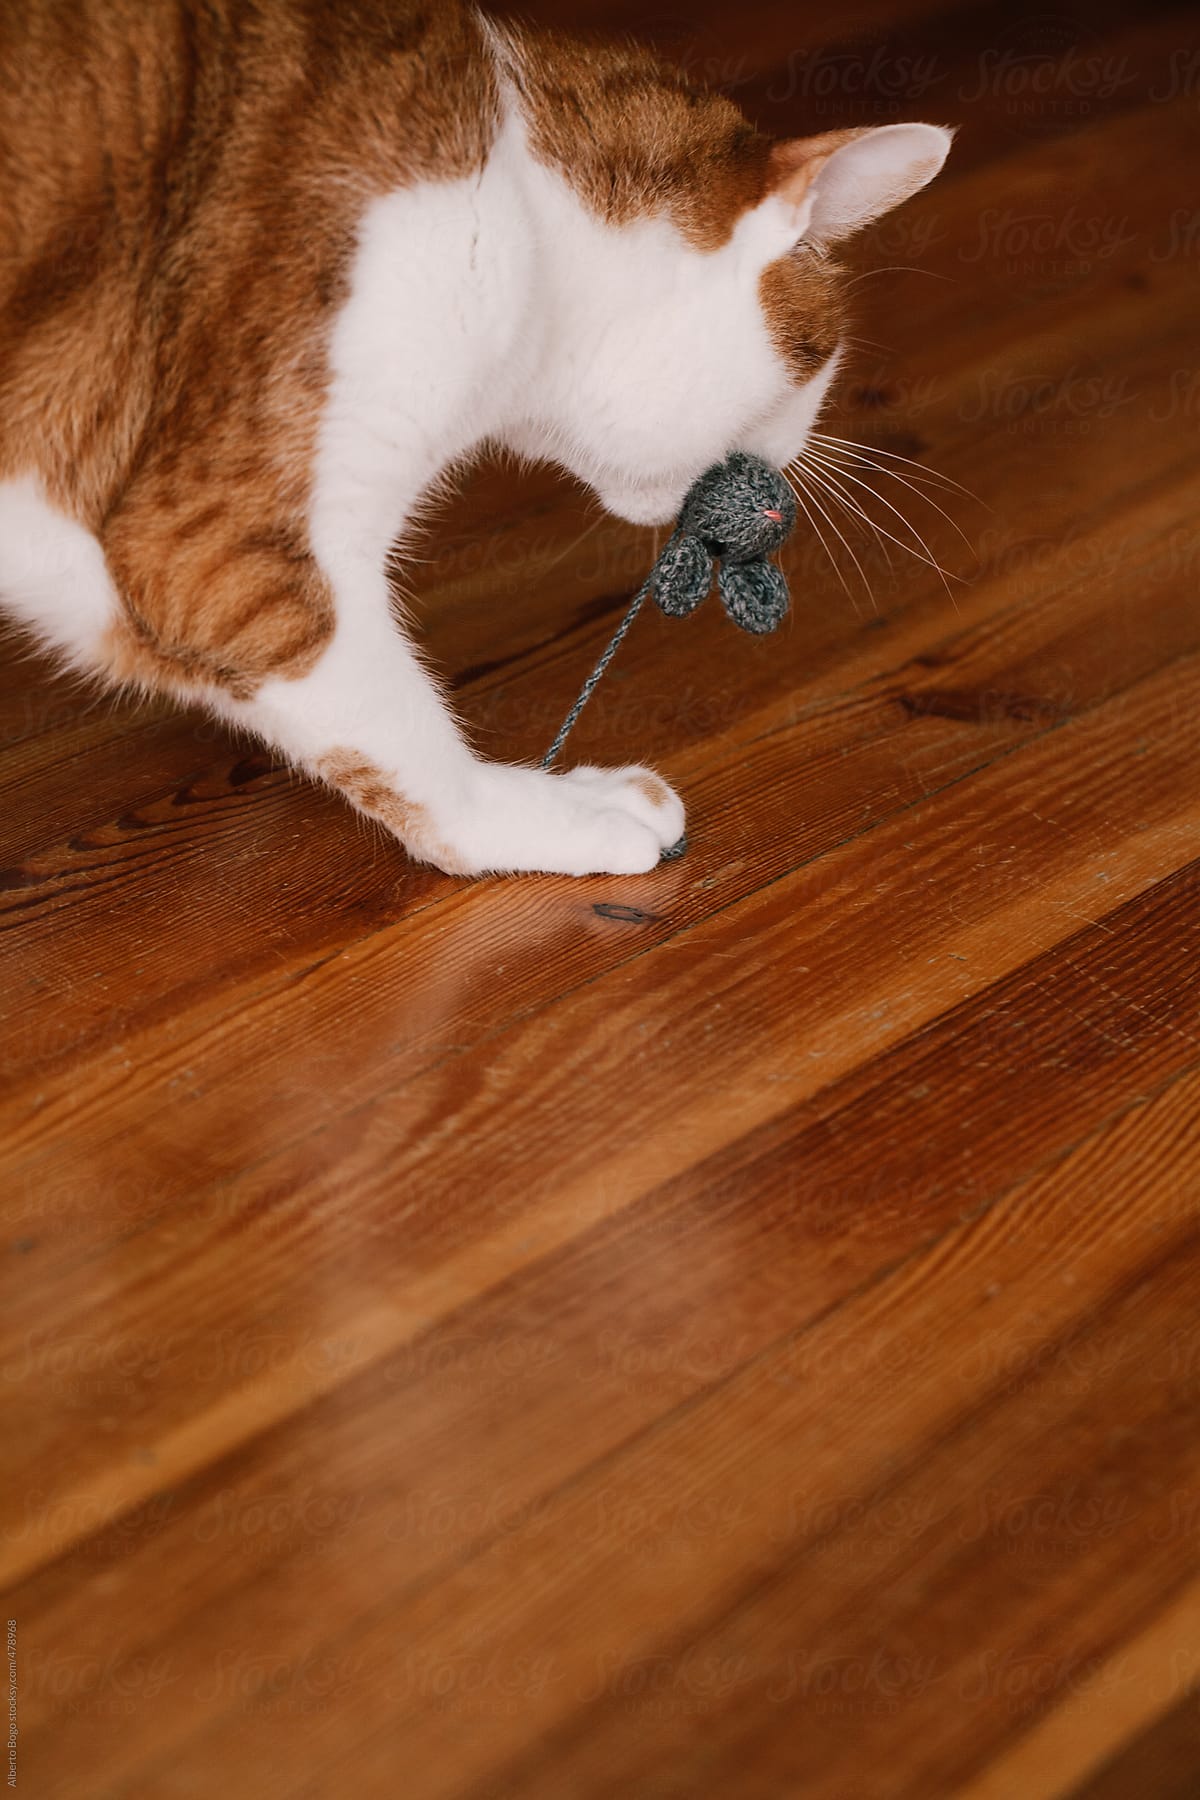 Kitty cat playing with a mouse wool